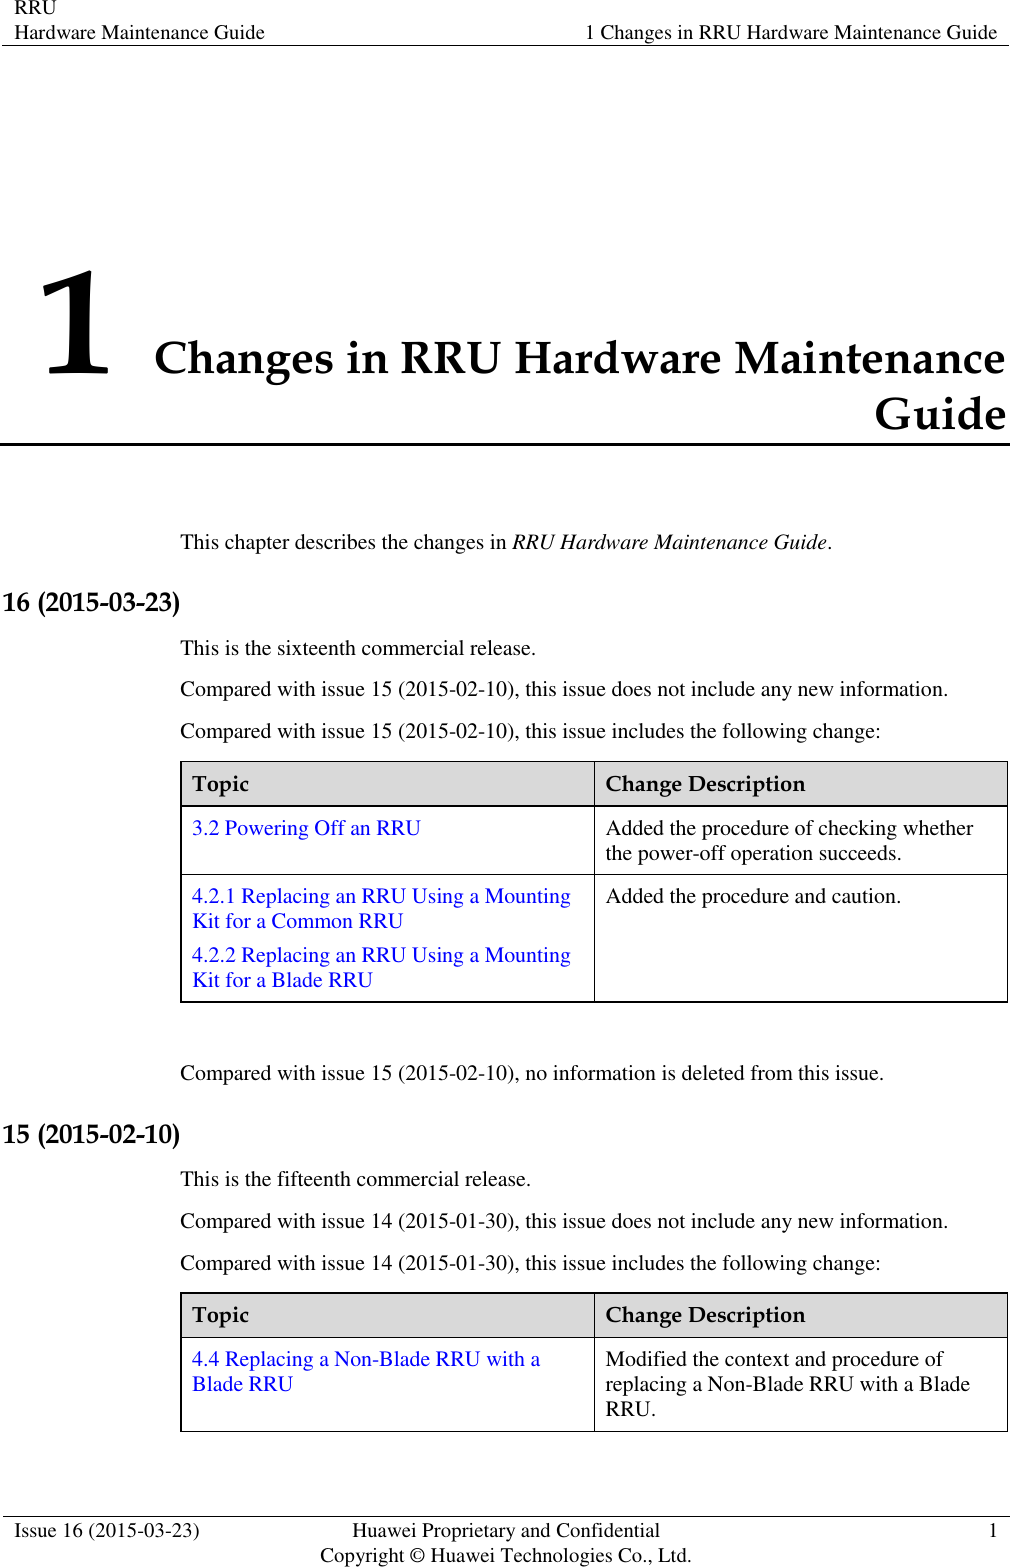 RRU Hardware Maintenance Guide 1 Changes in RRU Hardware Maintenance Guide  Issue 16 (2015-03-23) Huawei Proprietary and Confidential                                     Copyright © Huawei Technologies Co., Ltd. 1  1 Changes in RRU Hardware Maintenance Guide This chapter describes the changes in RRU Hardware Maintenance Guide. 16 (2015-03-23) This is the sixteenth commercial release. Compared with issue 15 (2015-02-10), this issue does not include any new information. Compared with issue 15 (2015-02-10), this issue includes the following change: Topic Change Description 3.2 Powering Off an RRU Added the procedure of checking whether the power-off operation succeeds. 4.2.1 Replacing an RRU Using a Mounting Kit for a Common RRU 4.2.2 Replacing an RRU Using a Mounting Kit for a Blade RRU Added the procedure and caution.  Compared with issue 15 (2015-02-10), no information is deleted from this issue. 15 (2015-02-10) This is the fifteenth commercial release. Compared with issue 14 (2015-01-30), this issue does not include any new information. Compared with issue 14 (2015-01-30), this issue includes the following change: Topic Change Description 4.4 Replacing a Non-Blade RRU with a Blade RRU Modified the context and procedure of replacing a Non-Blade RRU with a Blade RRU.  